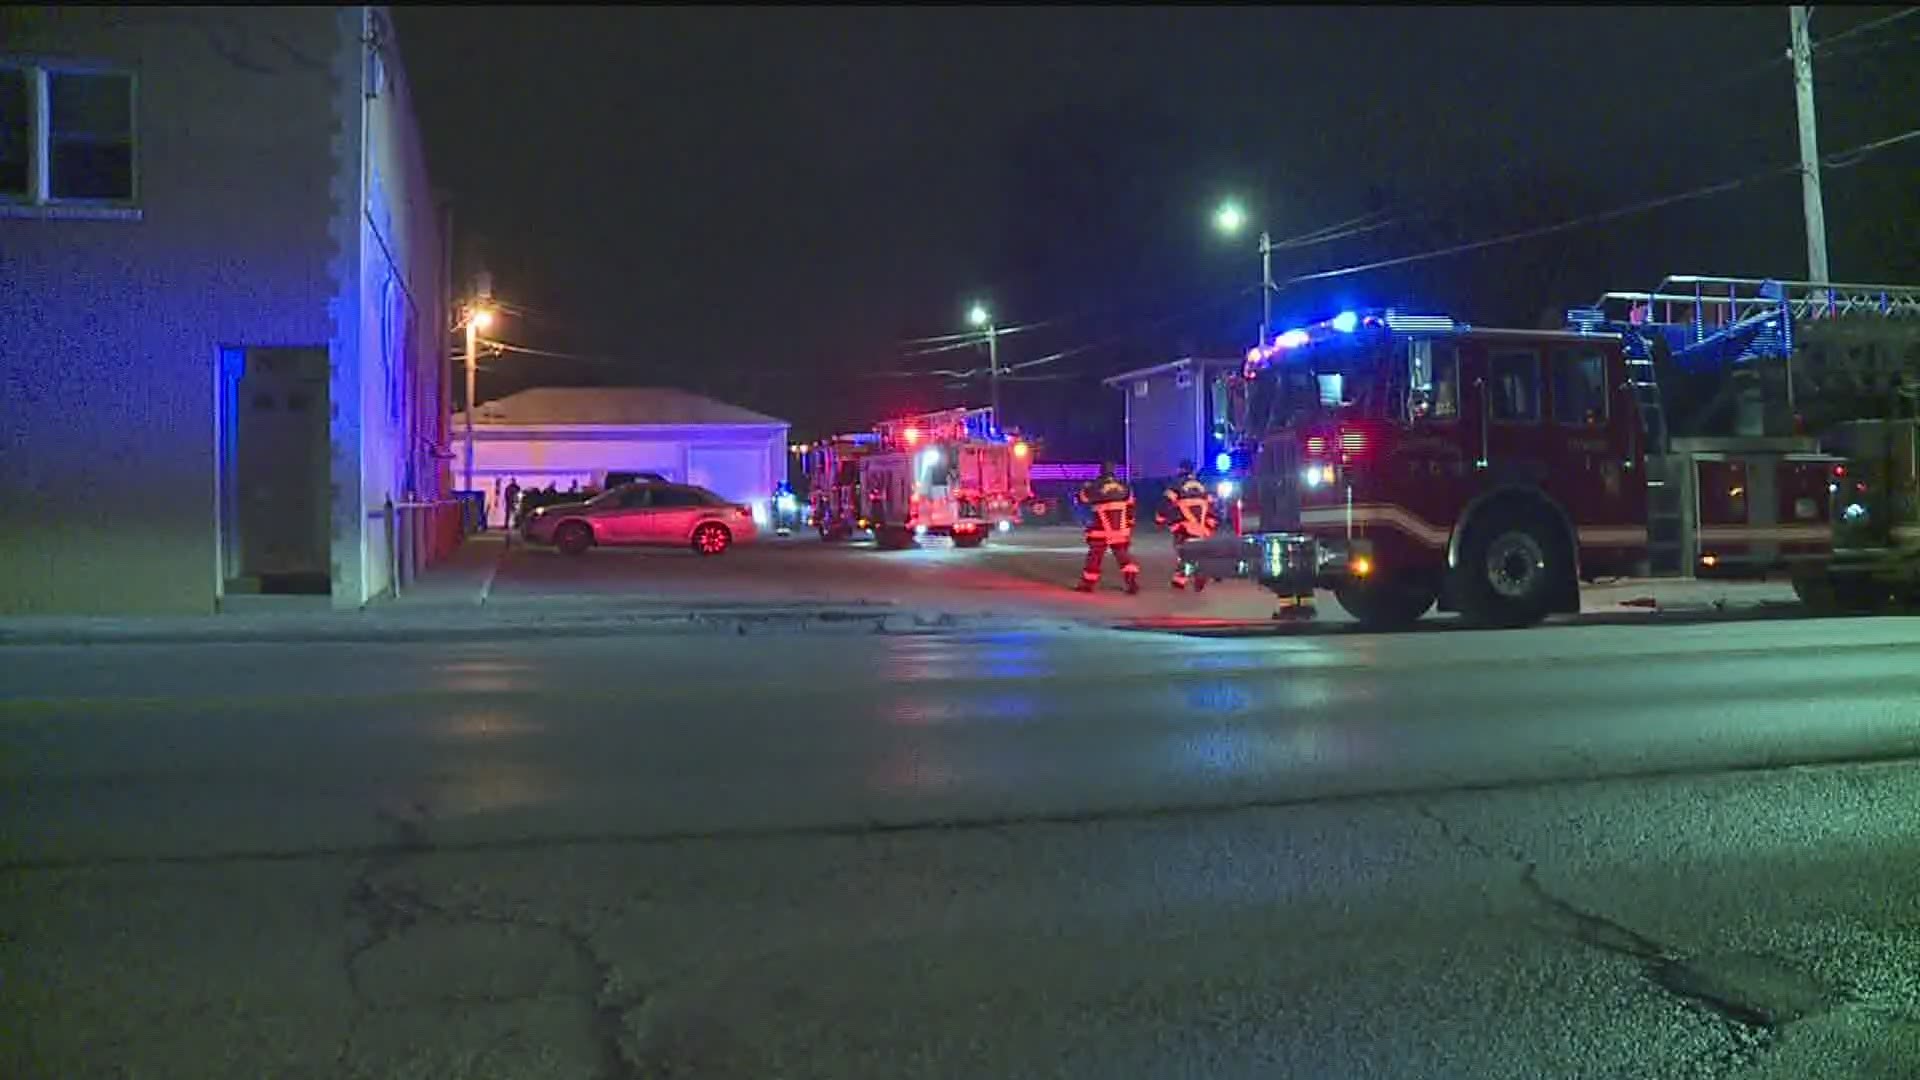 Fire Breaks Out in Davenport Apartment